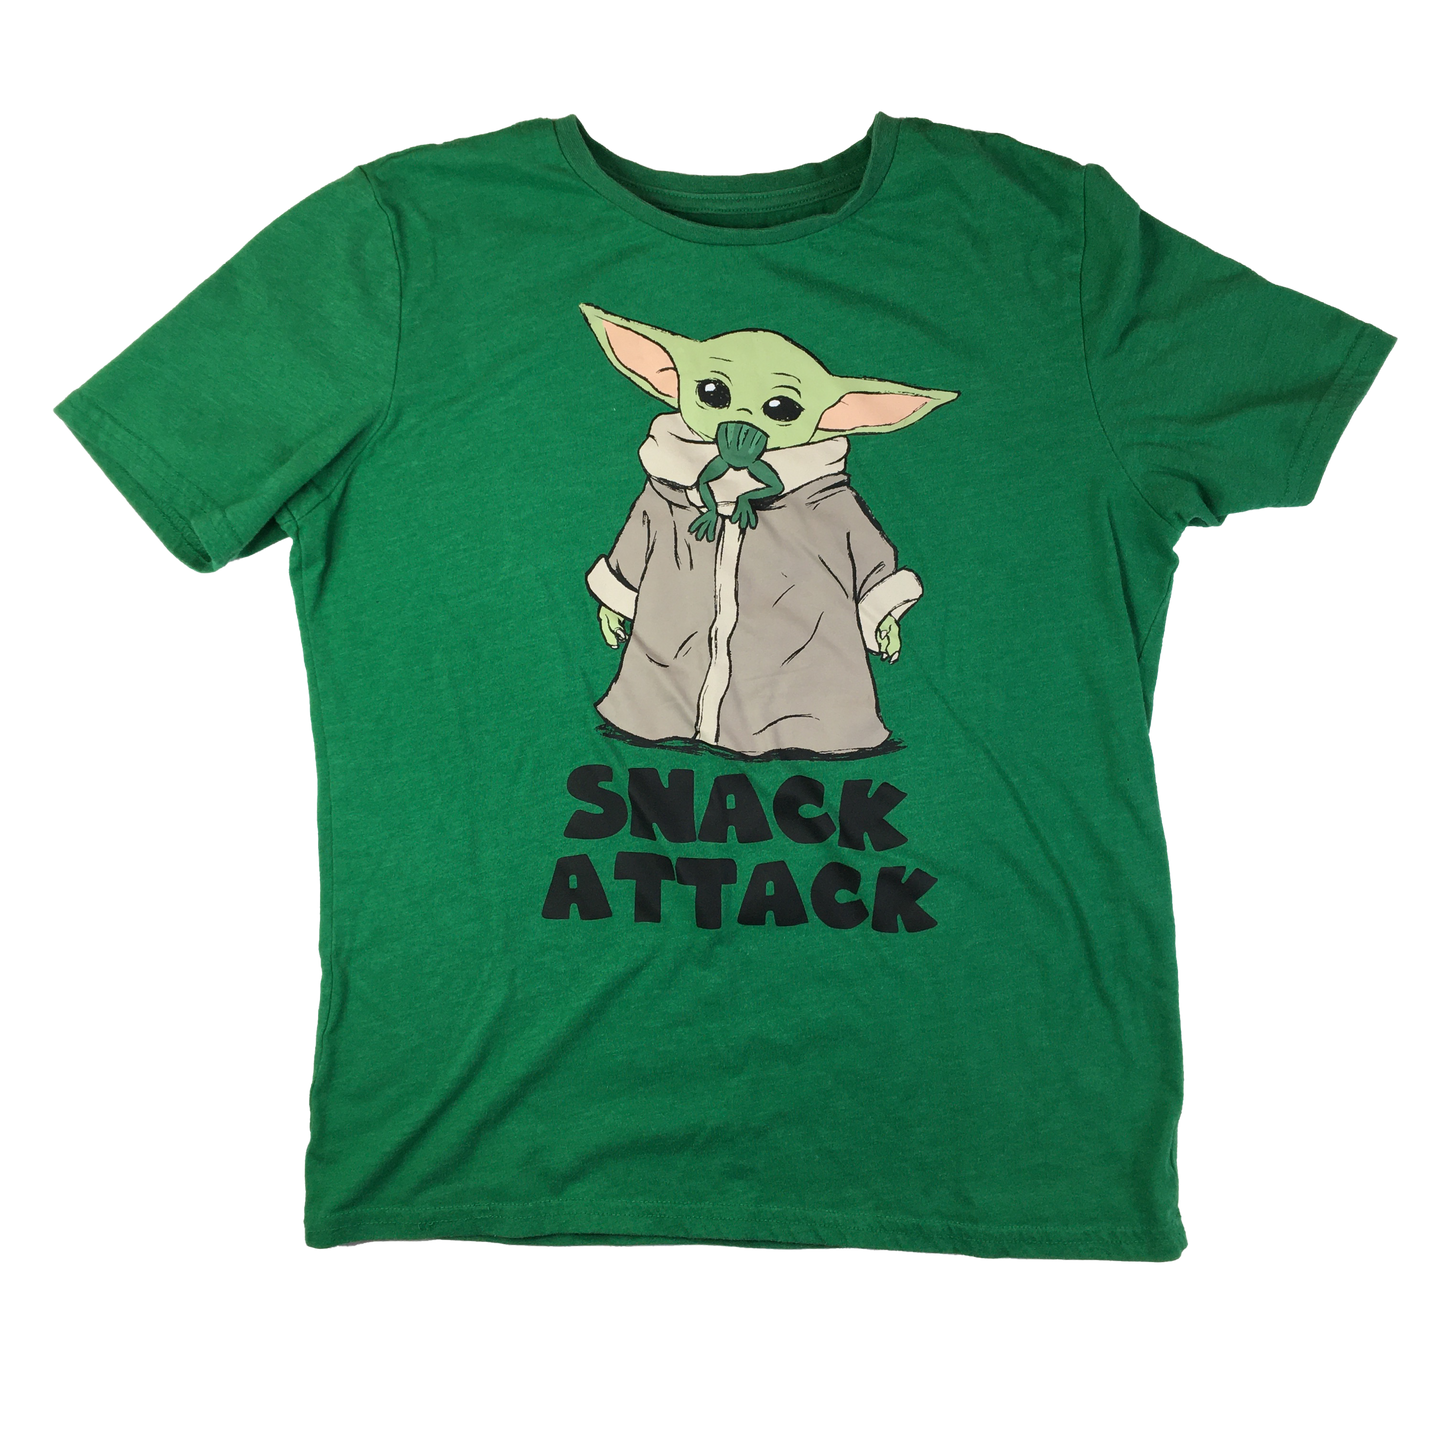 Star Wars Green T-Shirt with Grogu "Snack Attack" 14-16